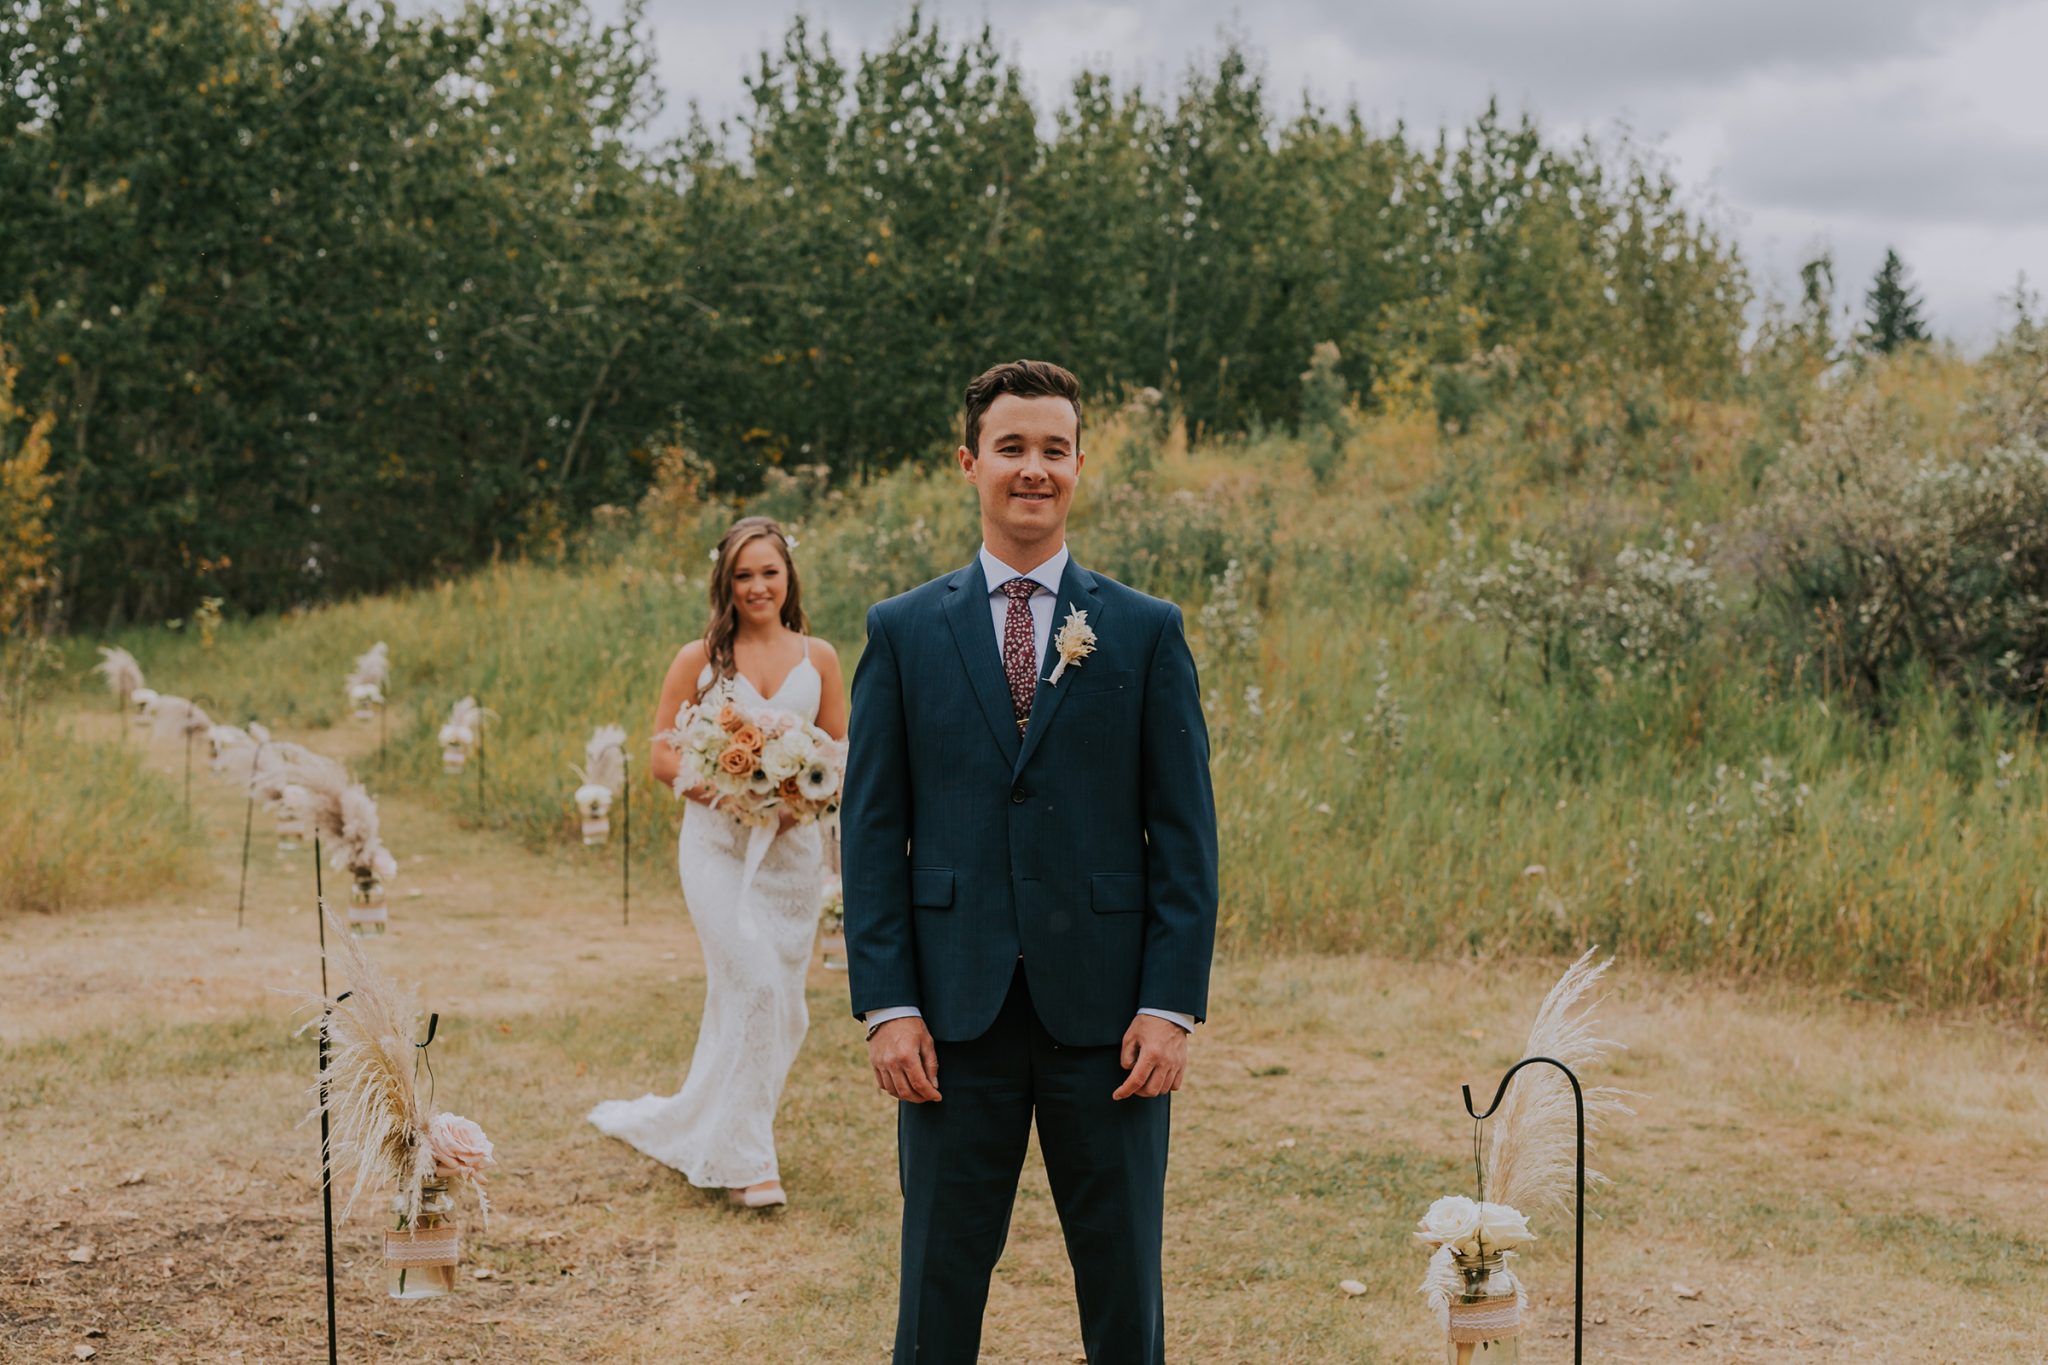 A Little Bit of Rain and Covid Restrictions weren't about to Slow This Couple Down! Featured on Brontë Bride, first look, groom style